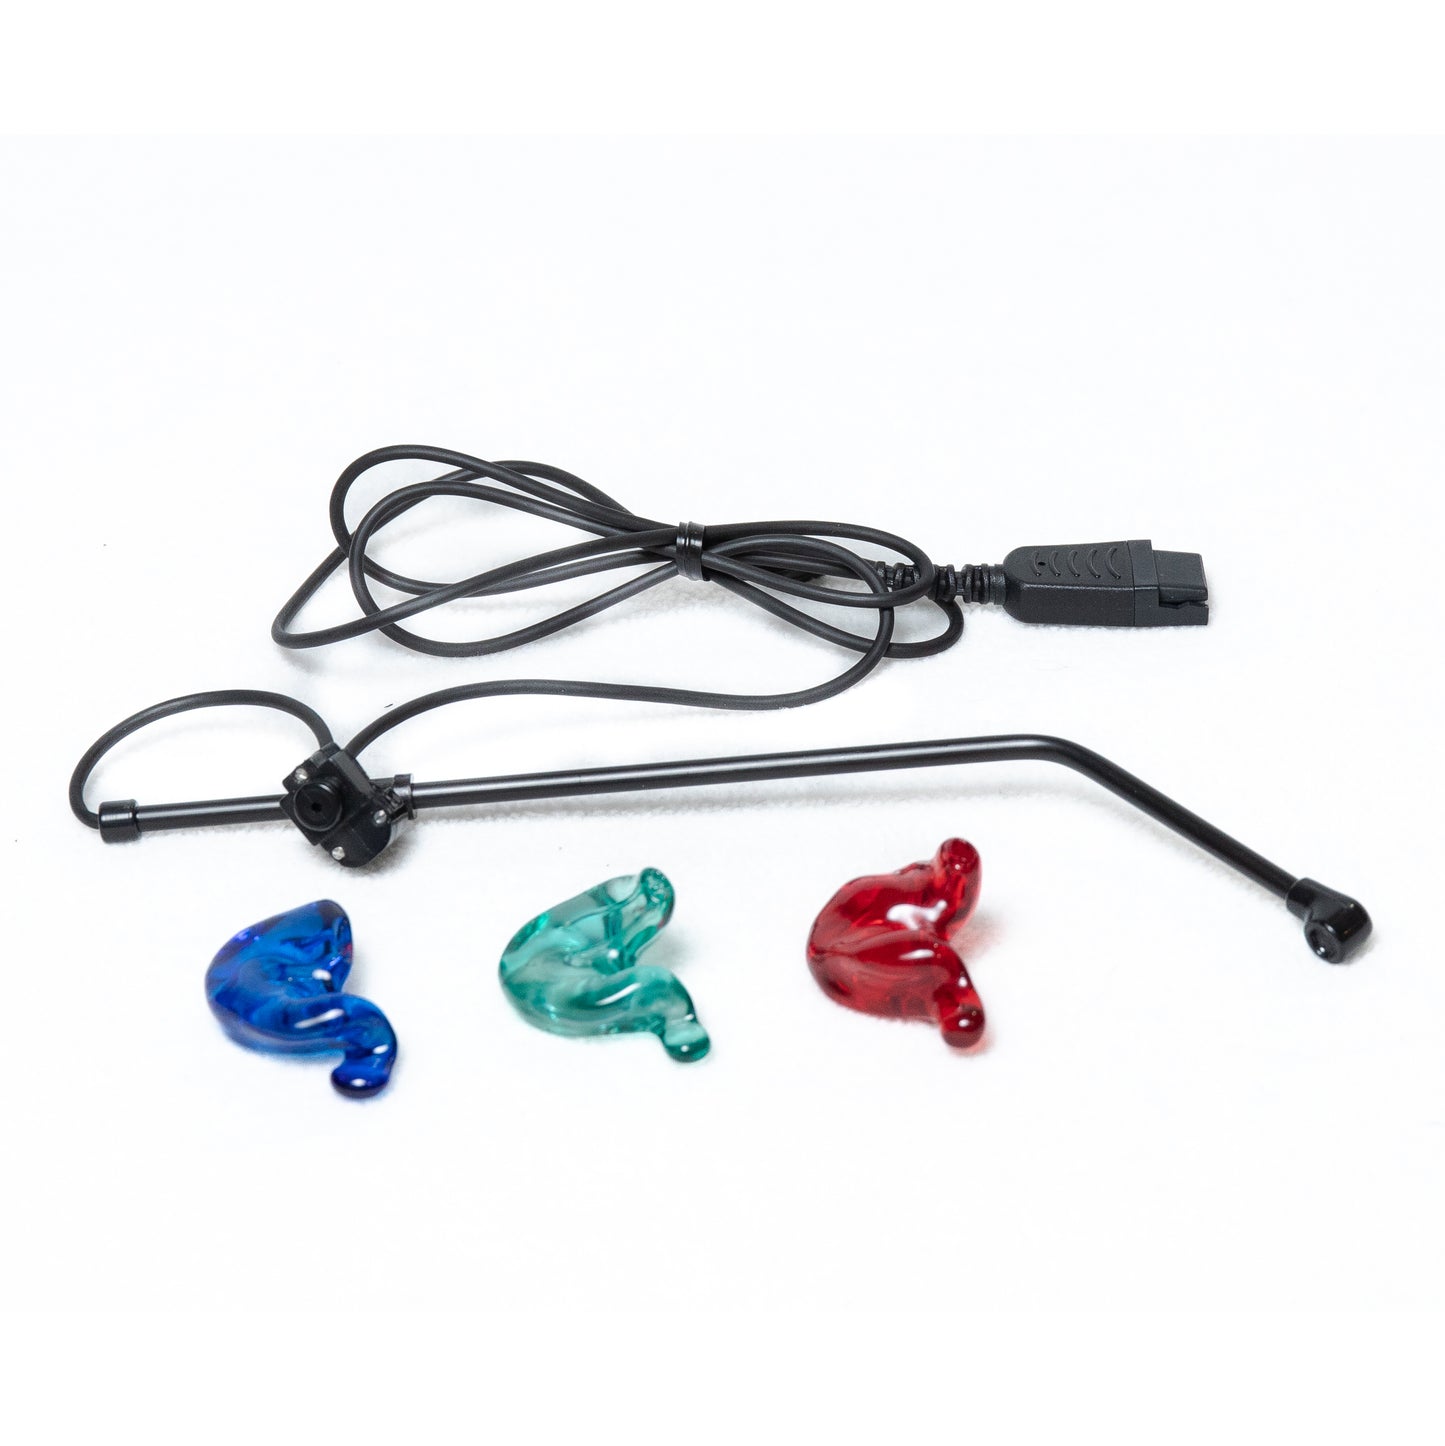 Starkey S130 Custom Headset with Non-Noise Canceling Mic (Earmold NOT Included)